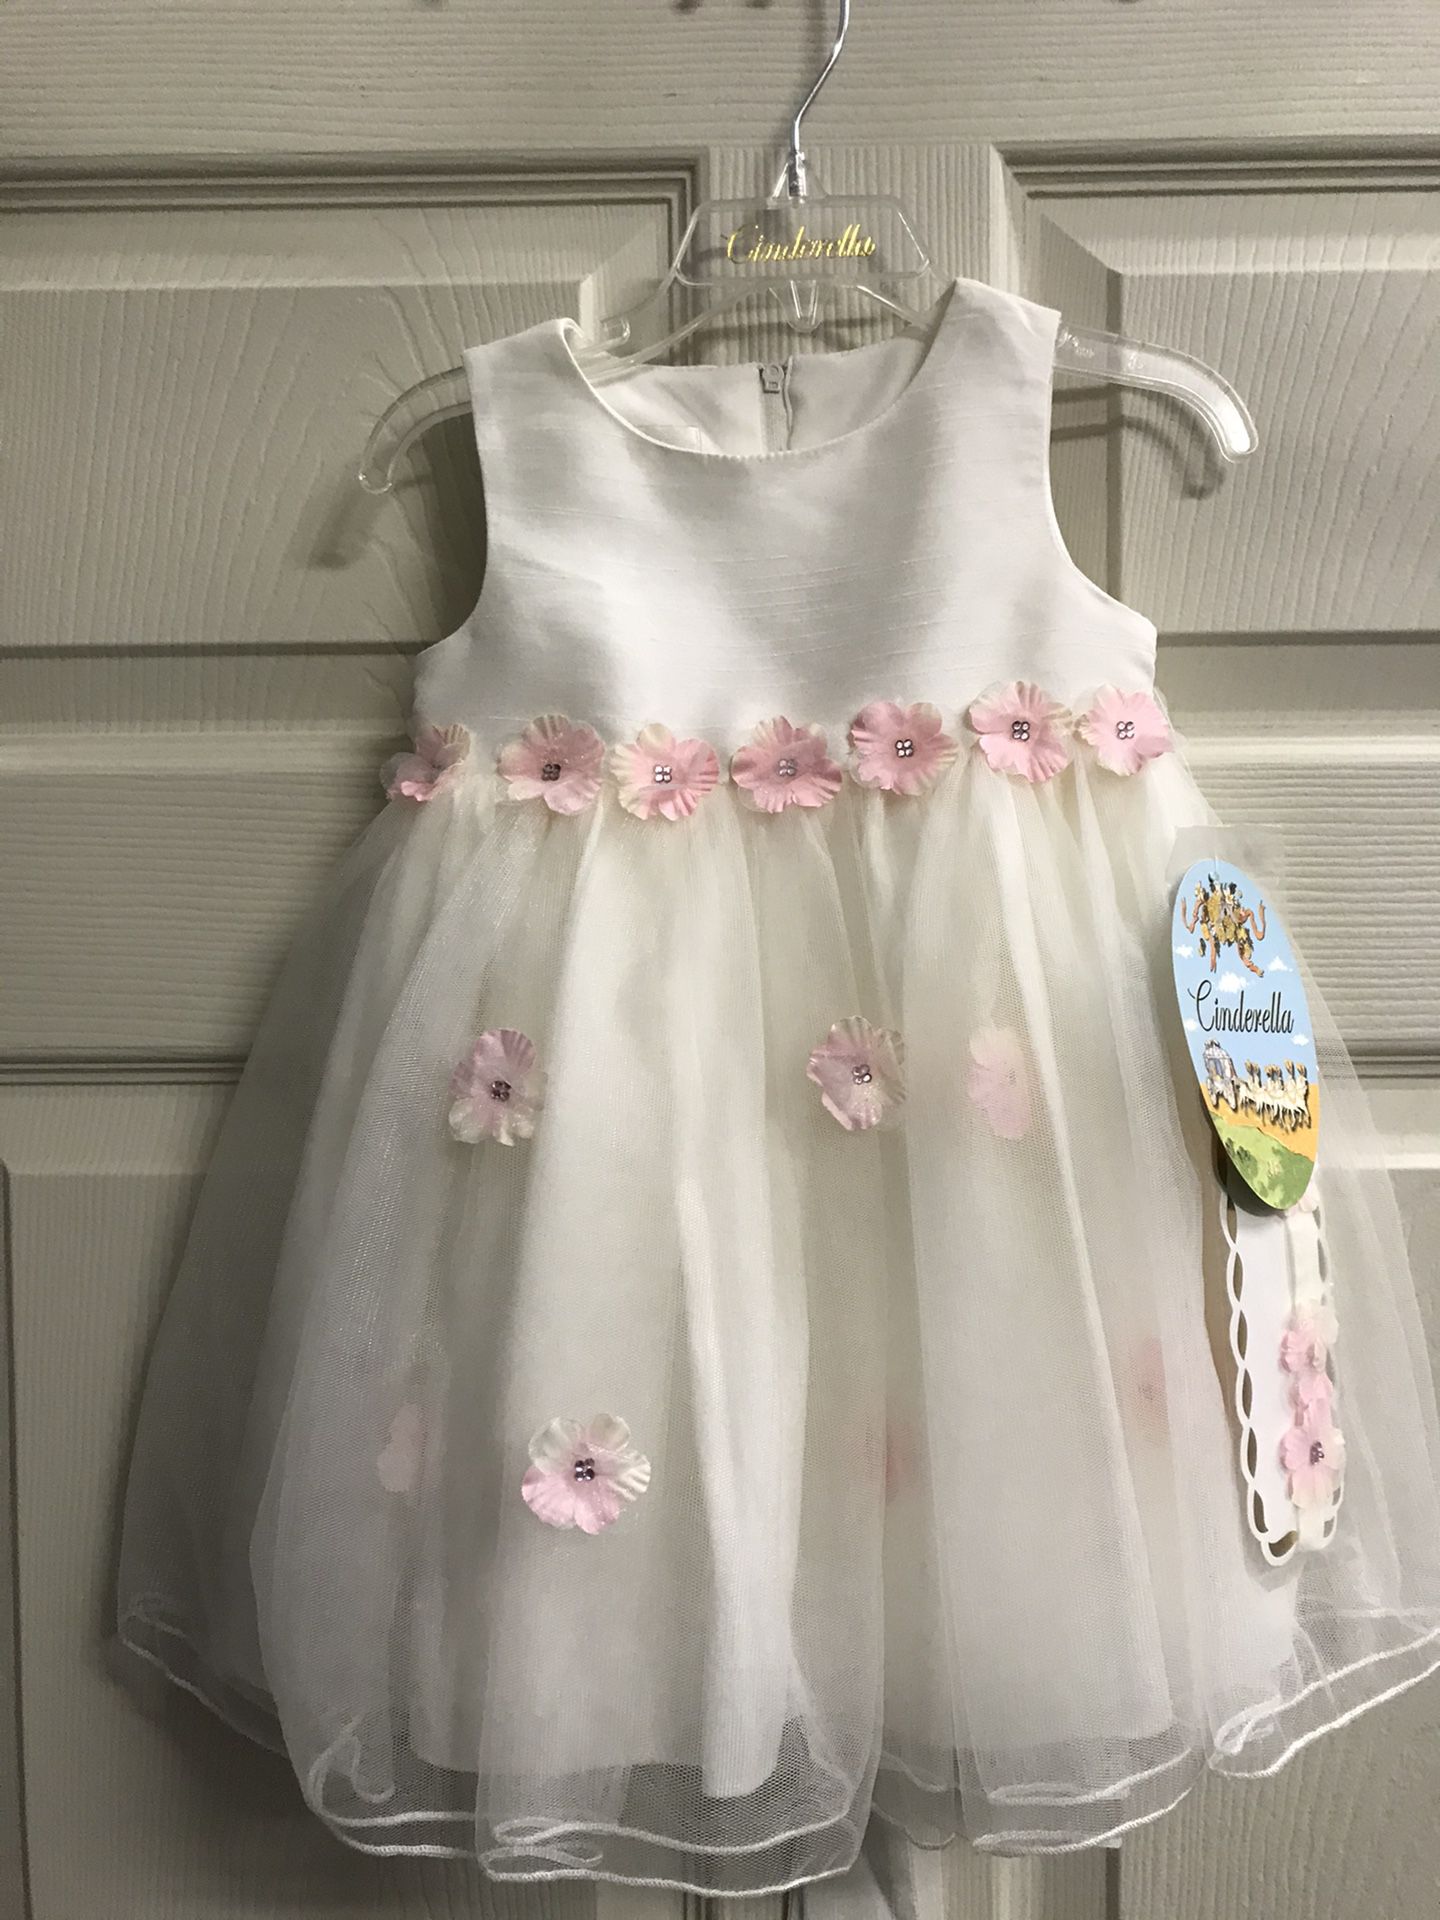 Cinderella Brand White Dress With Pink Flowers, Sash and Bloomers NWT - Size 24M.